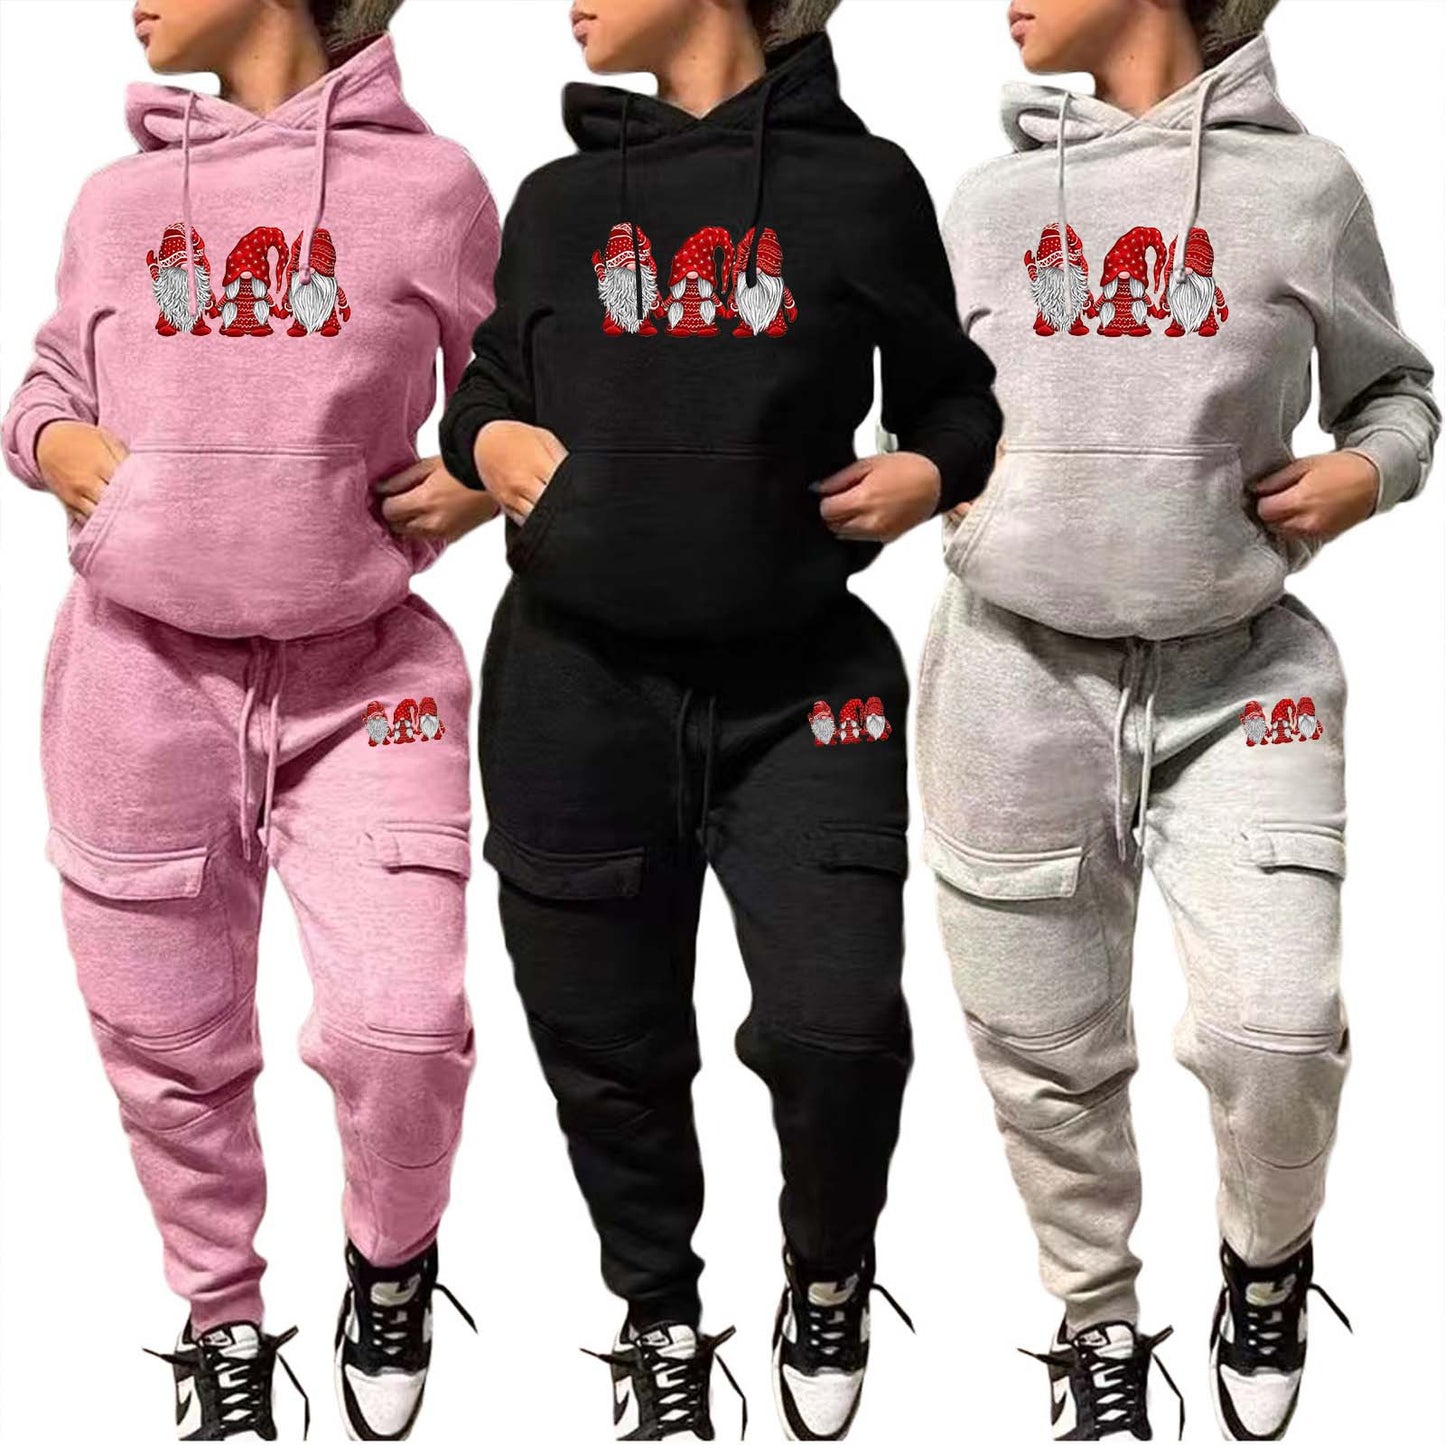 BamBam Women's Fashion Casual Hooded Two Piece Sports Tracksuit - BamBam